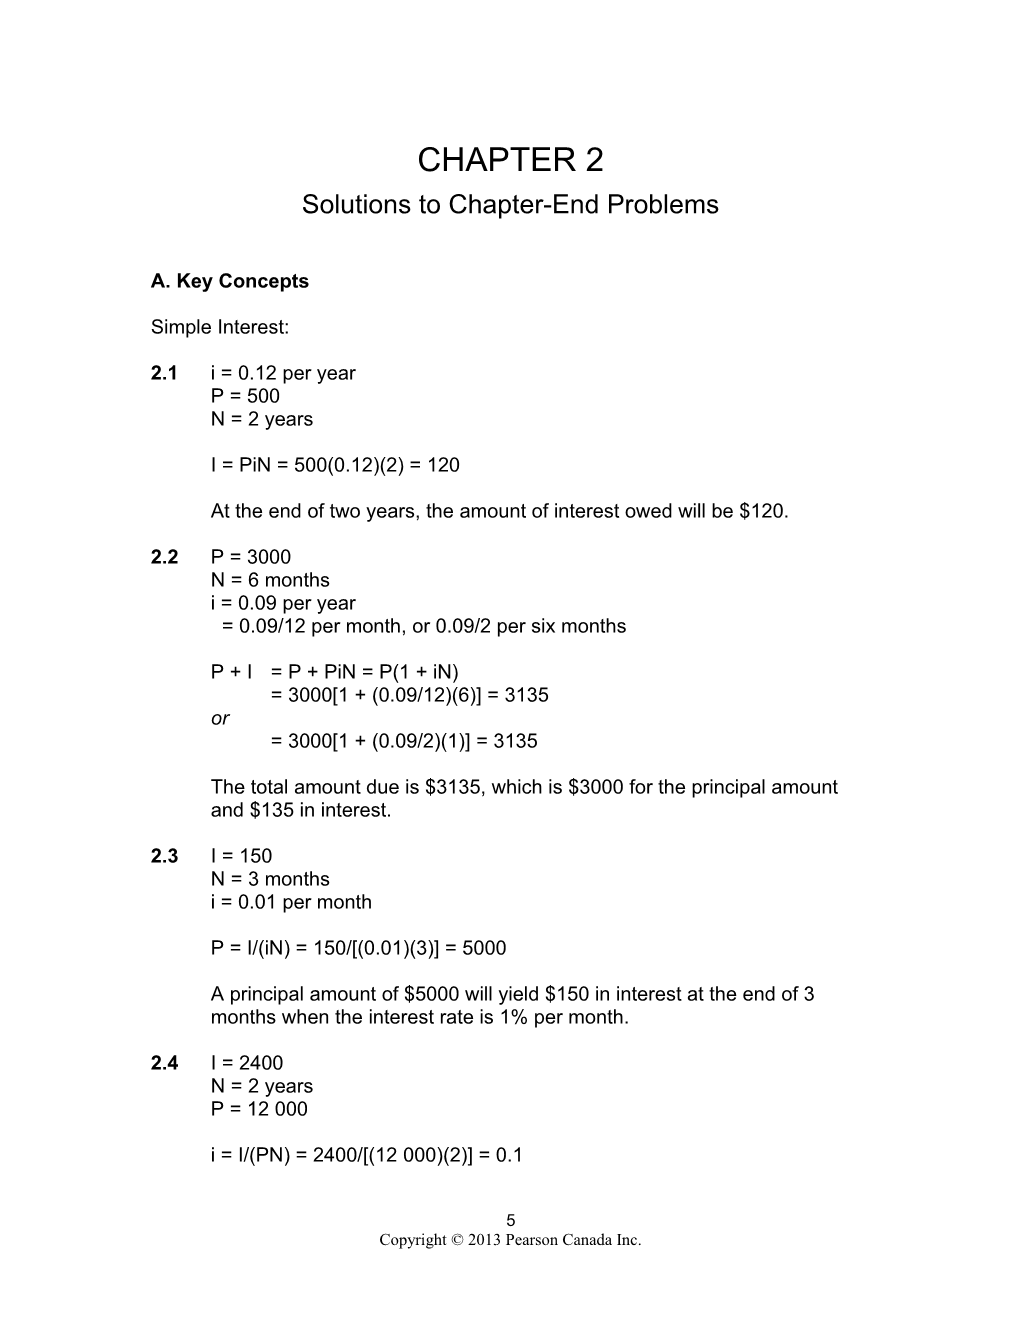 Solutions to Chapter-End Problems